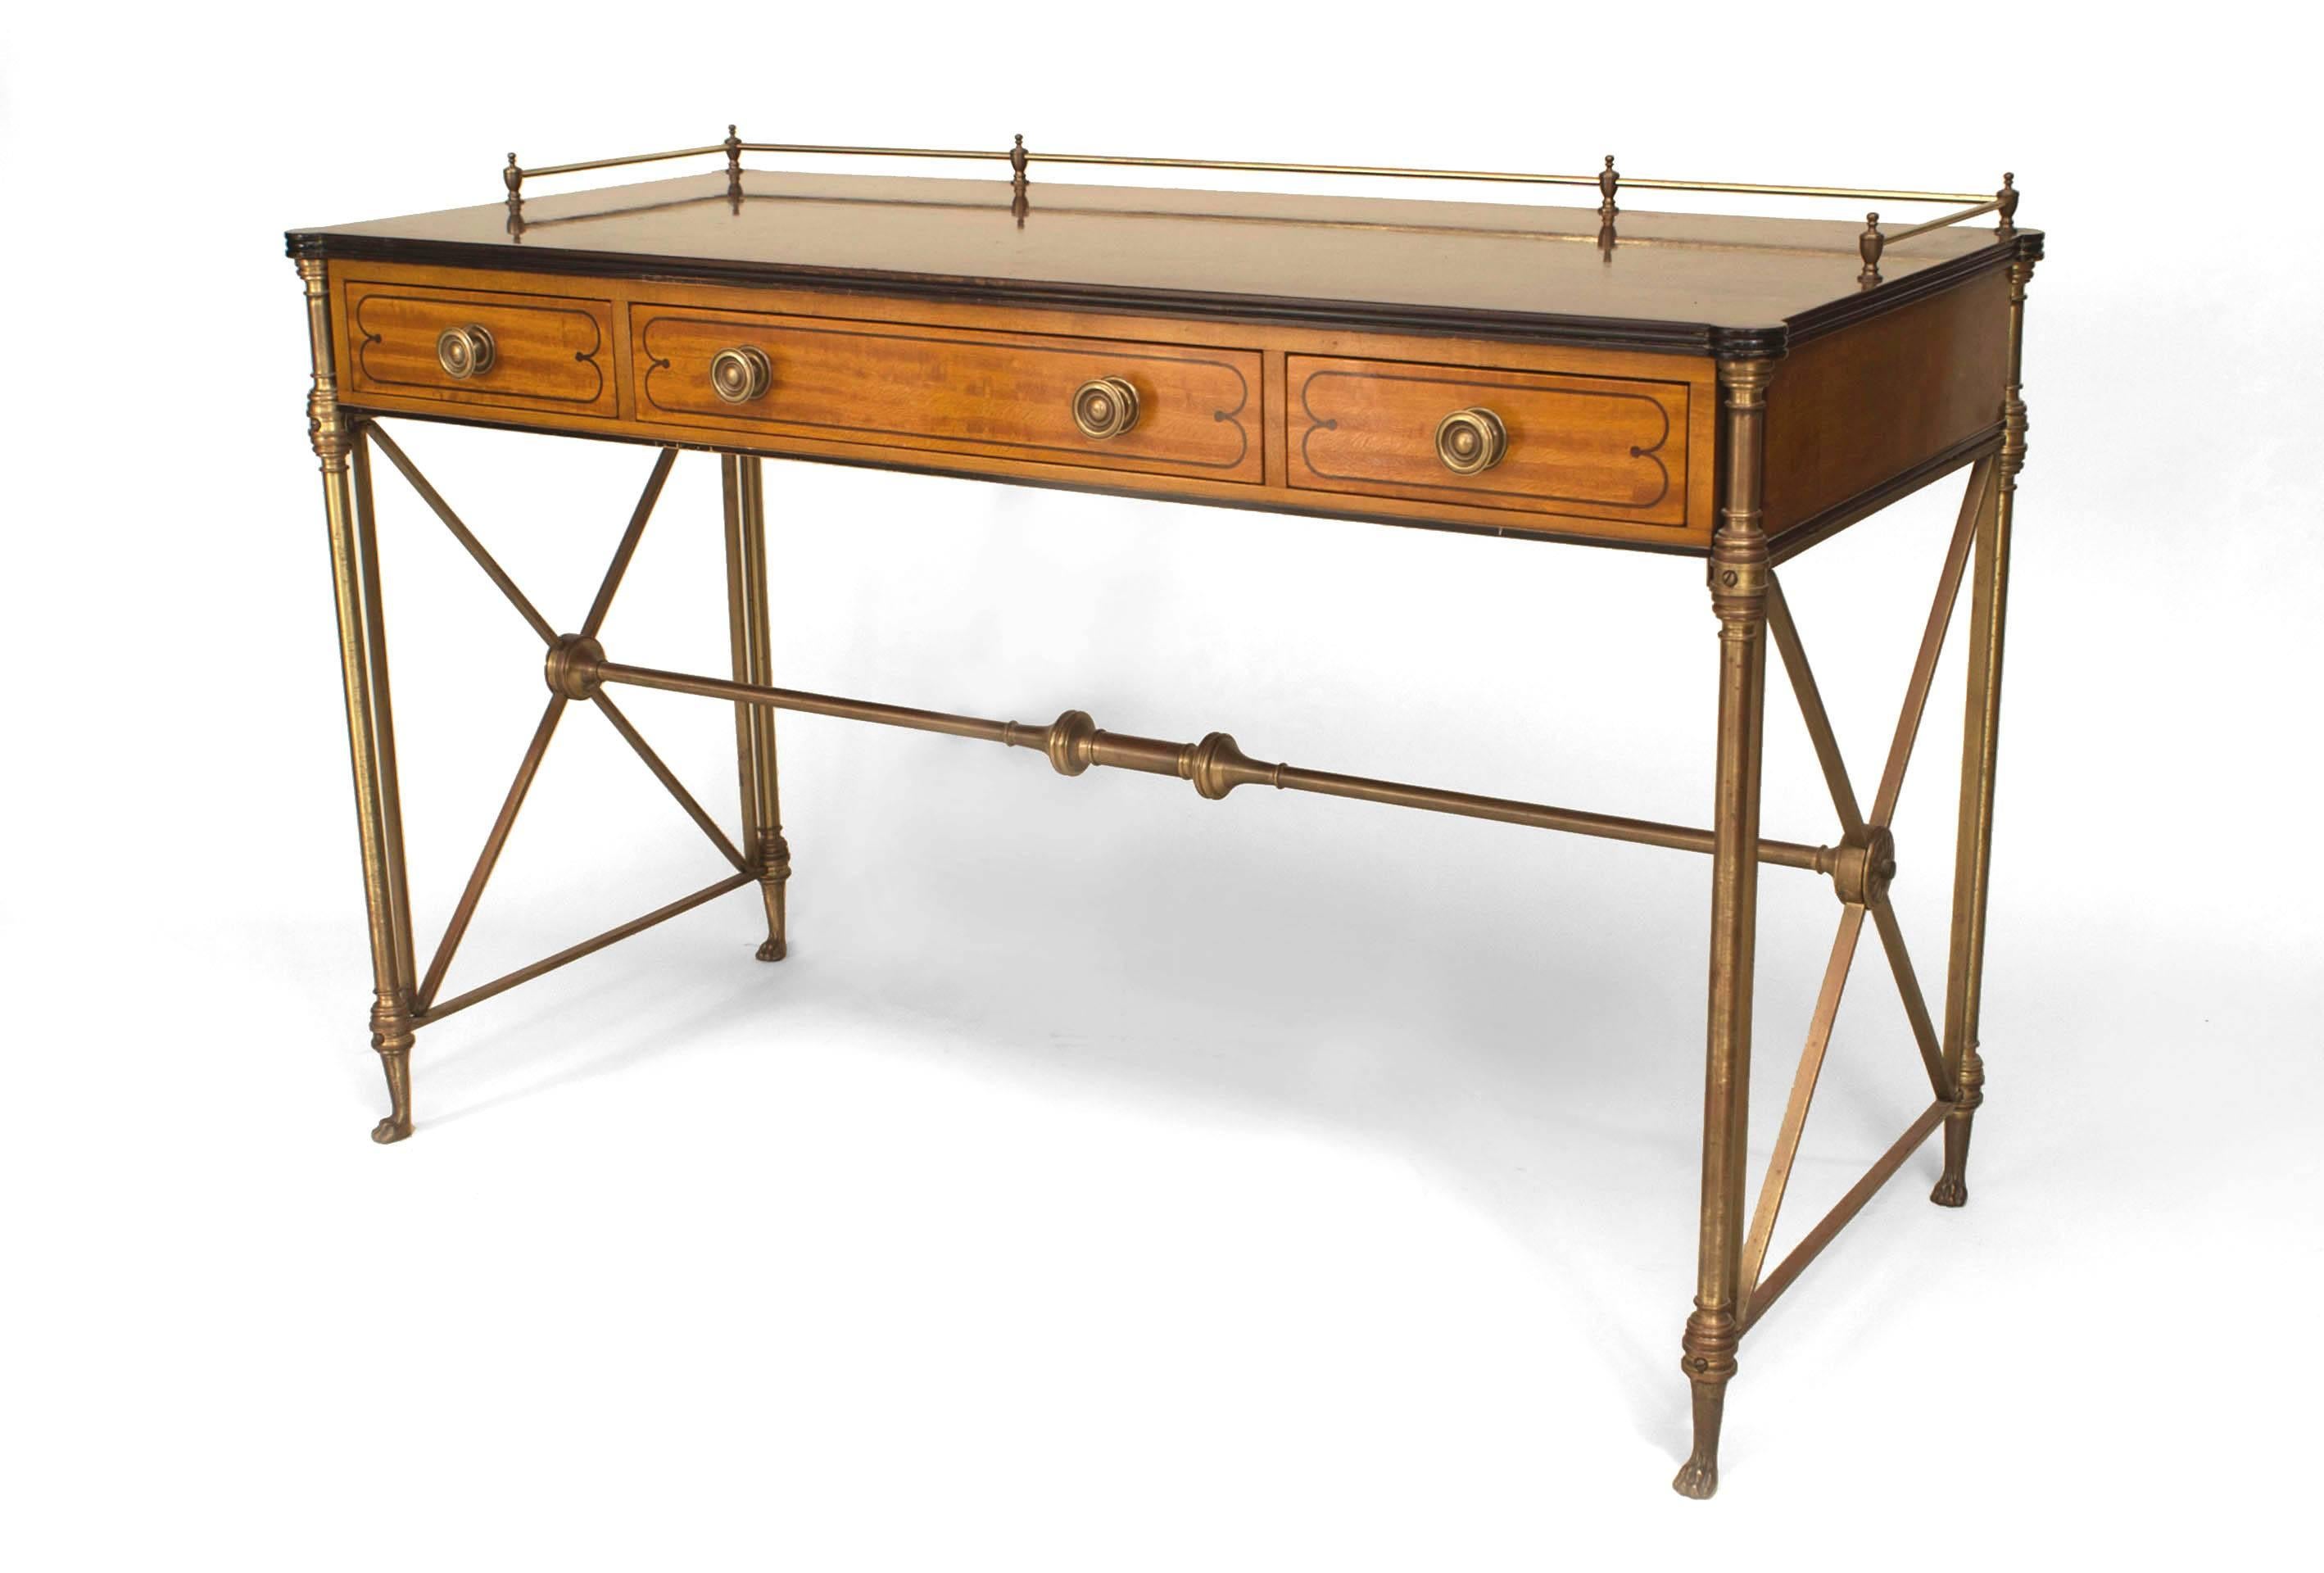 1940's French Charles X desk composed of maple with ebony inlay and a rectangular rosewood top with a brass gallery above three drawers and Neoclassical x-form legs. The desk is signed 